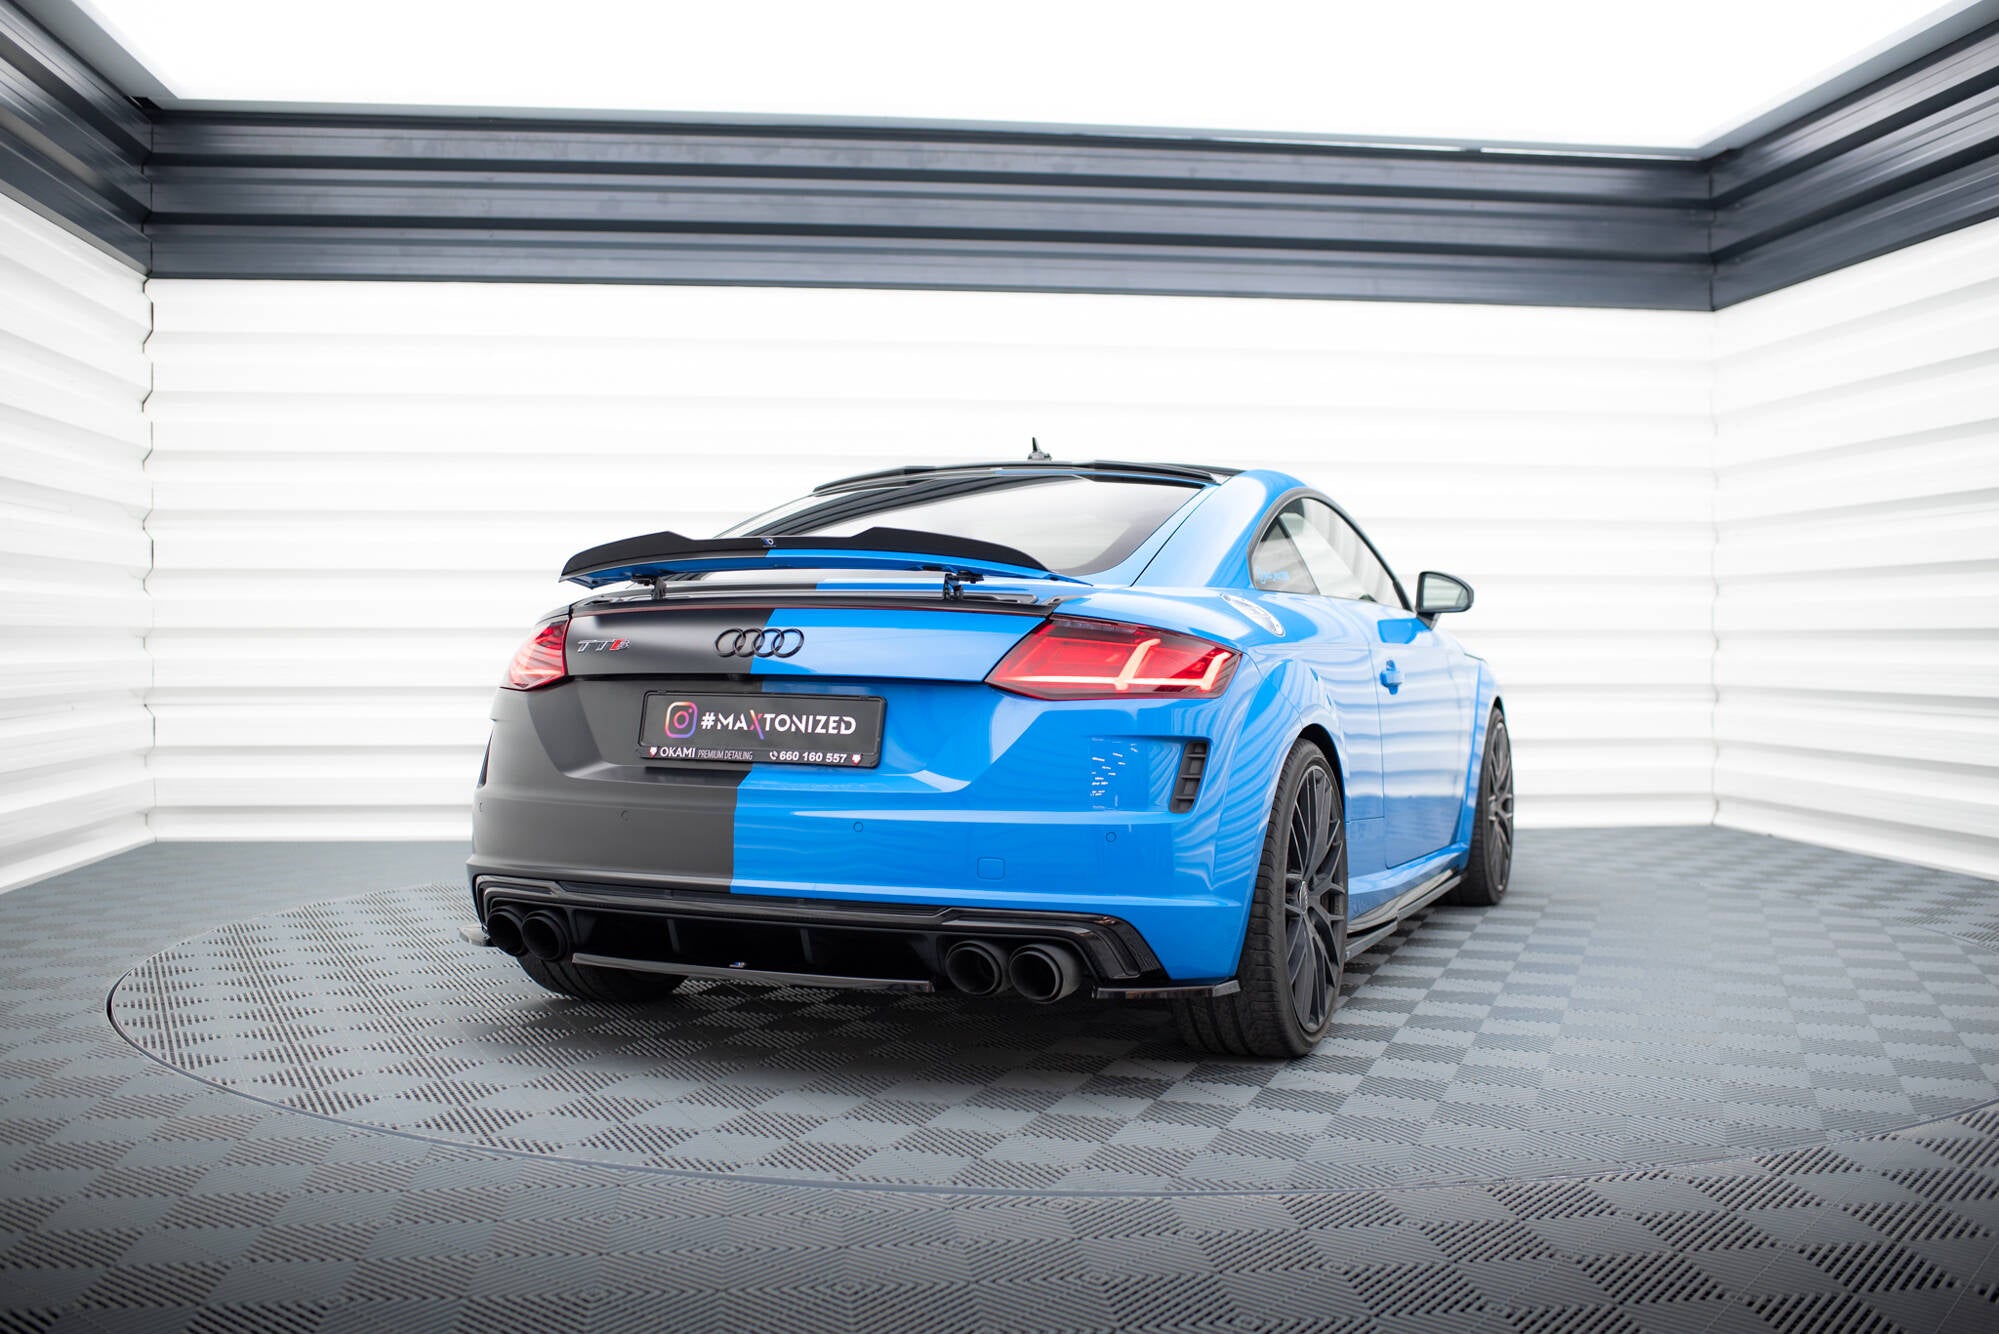 The extension of the rear window Audi TT S 8S Facelift